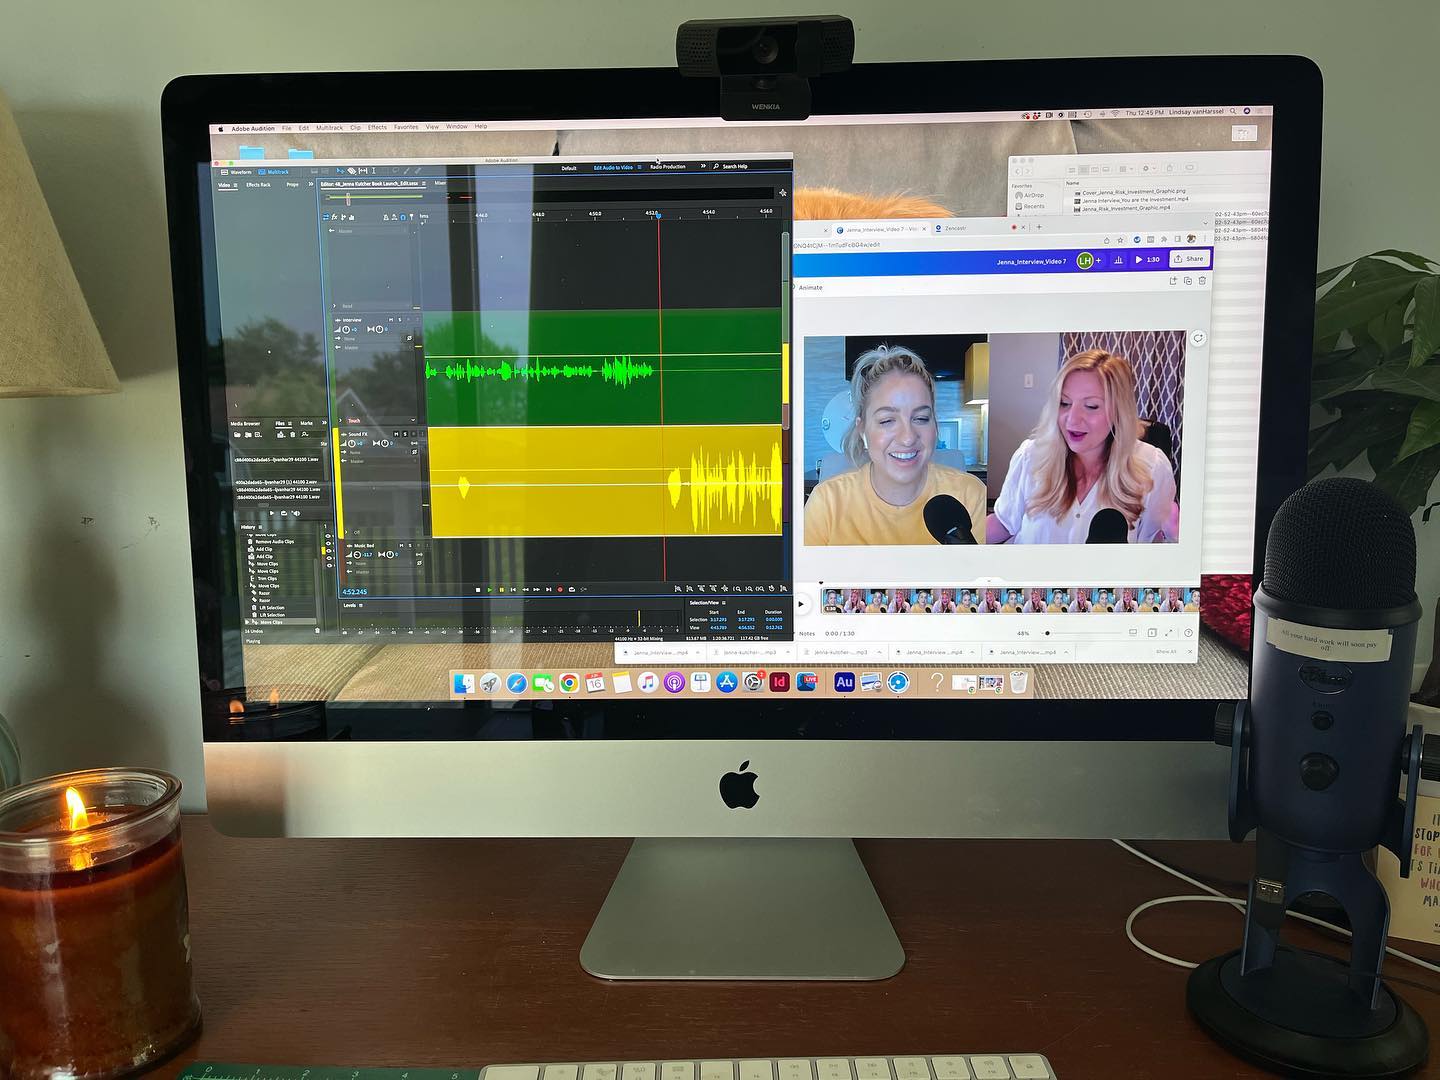 Editing a podcast episode with @jennakutcher … is this real life? Total “pinch me” moment over here 🙏🏻✨ So grateful she came on the show and SO excited for her book to launch in just 12 short days. 

We have some fun stuff coming your way so be sure to watch for the podcast to drop next week! 🙌🏼📒 #howareyoureallybook